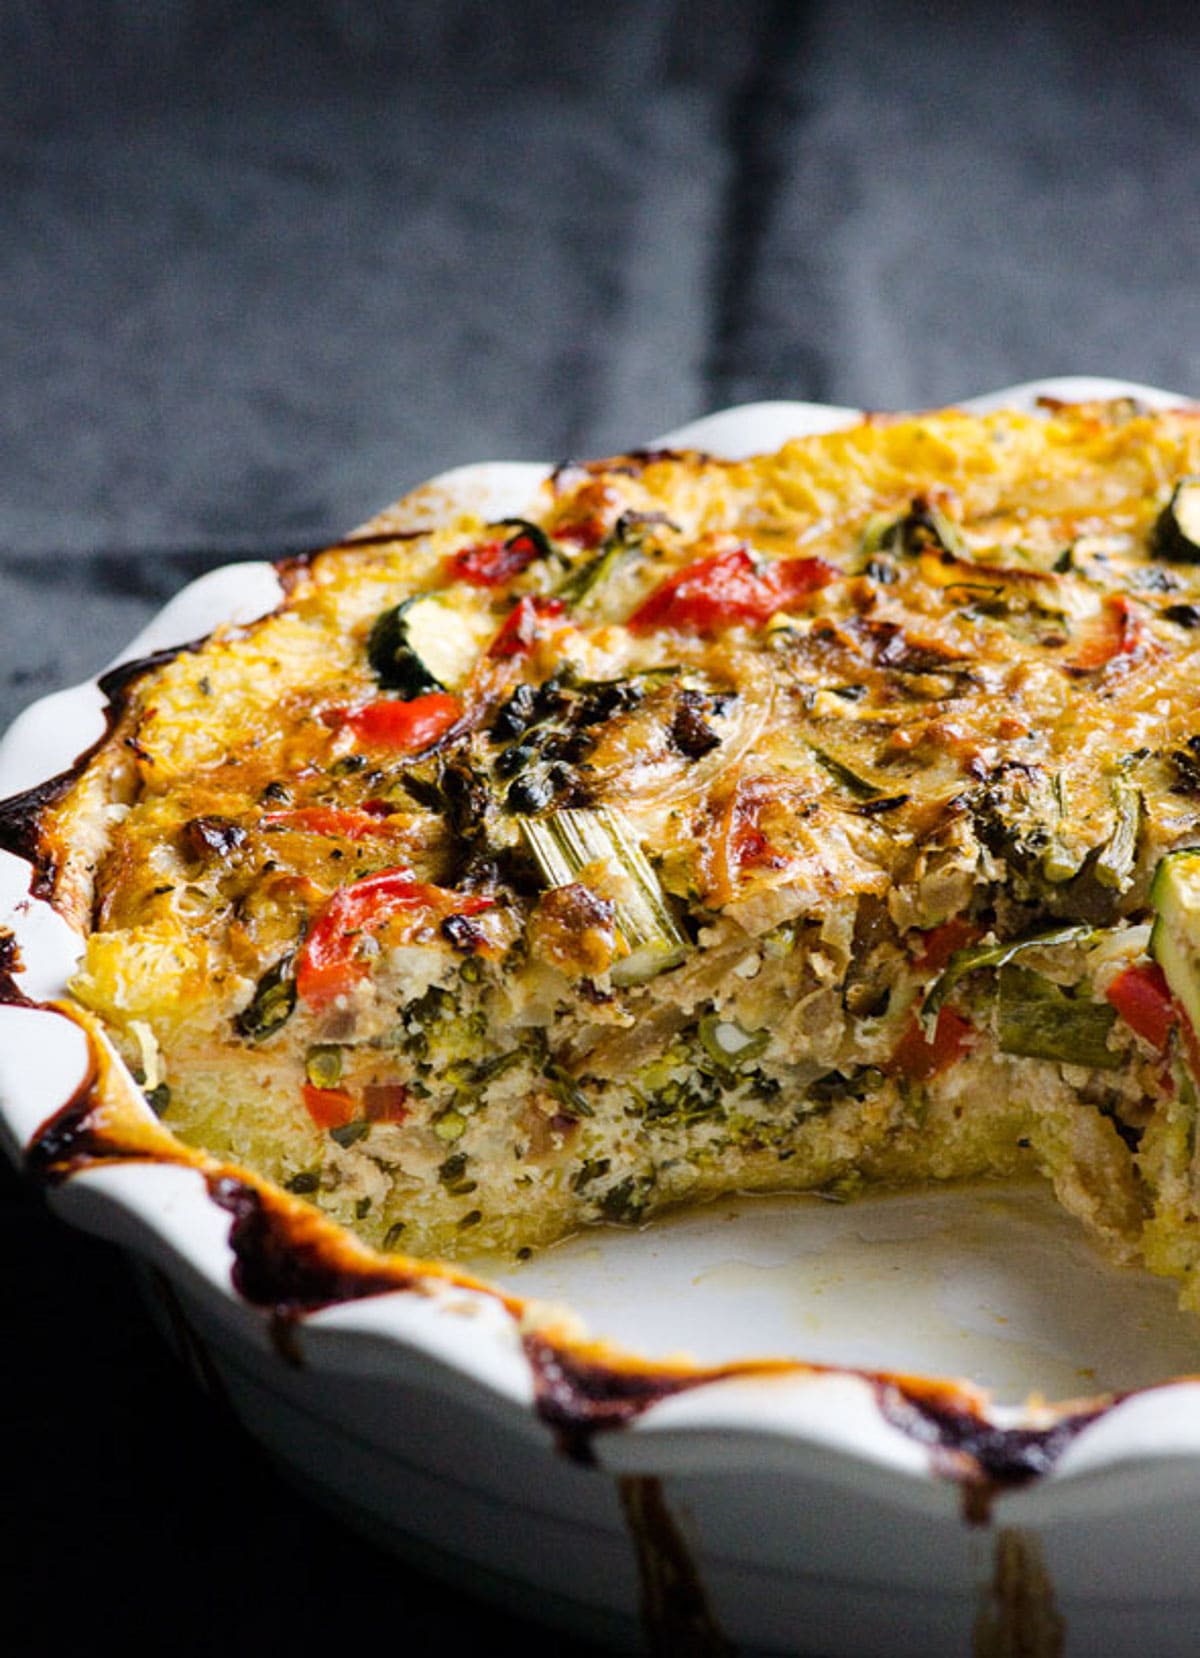 Spaghetti squash quiche sliced and showing texture inside.